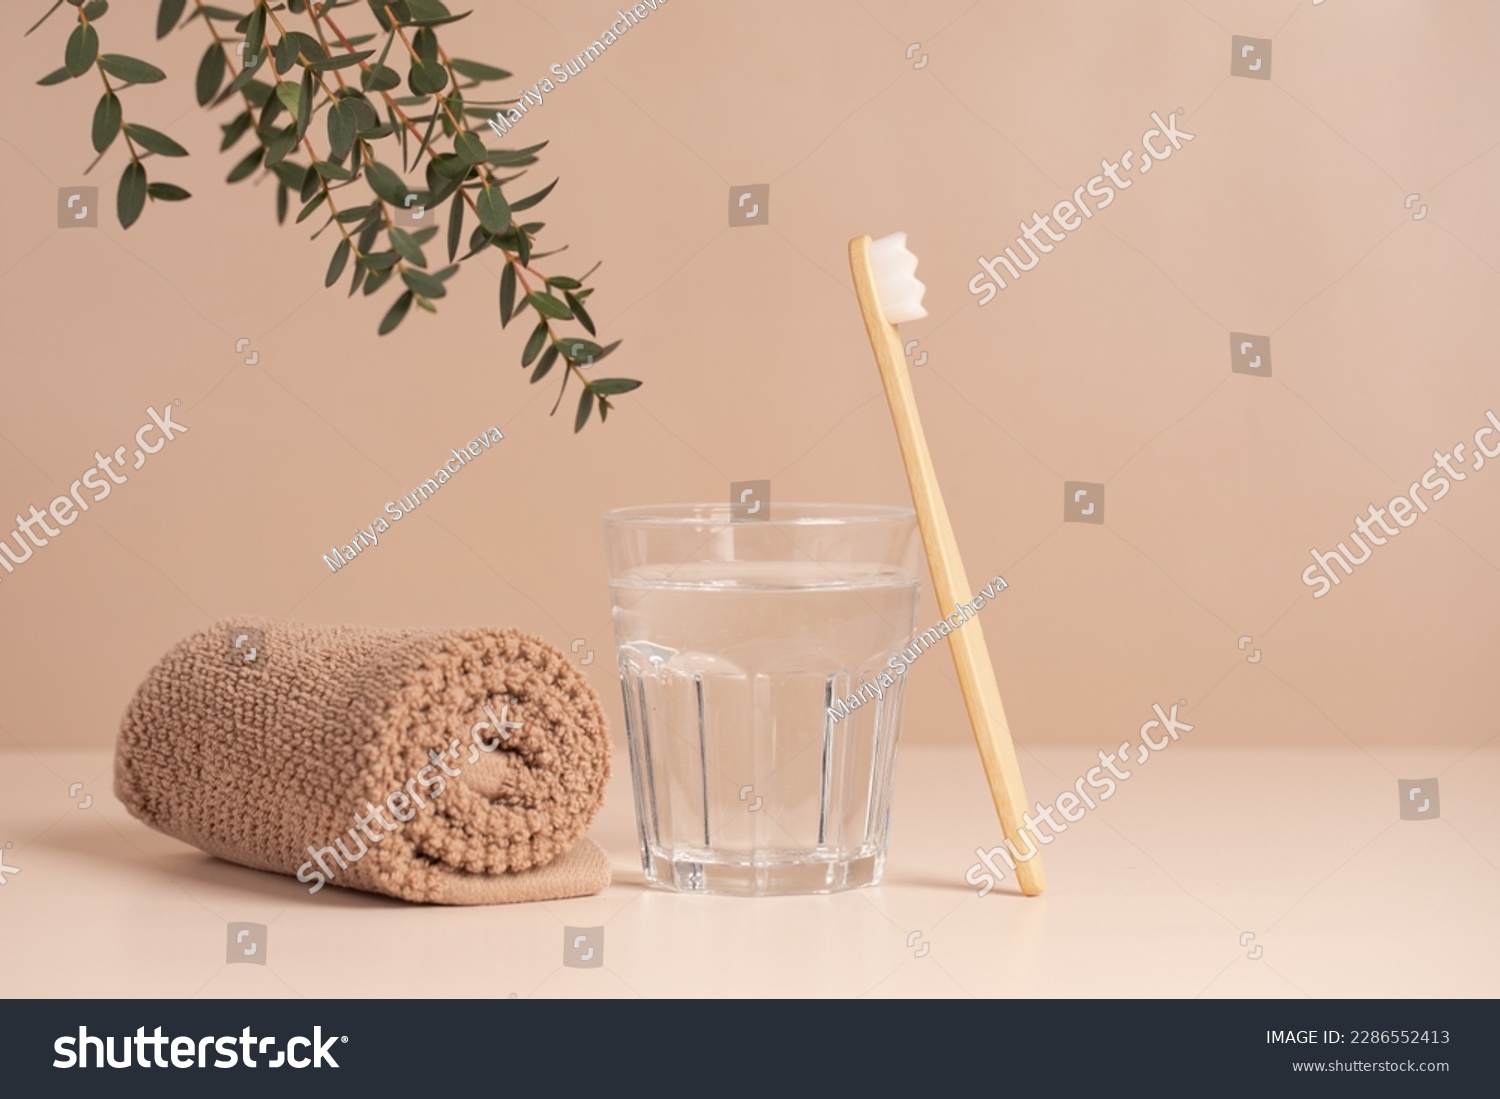 Bamboo toothbrush, towel and a glass of water. Eco-friendly items. Oral care. Biodegradable personal care products. #2286552413